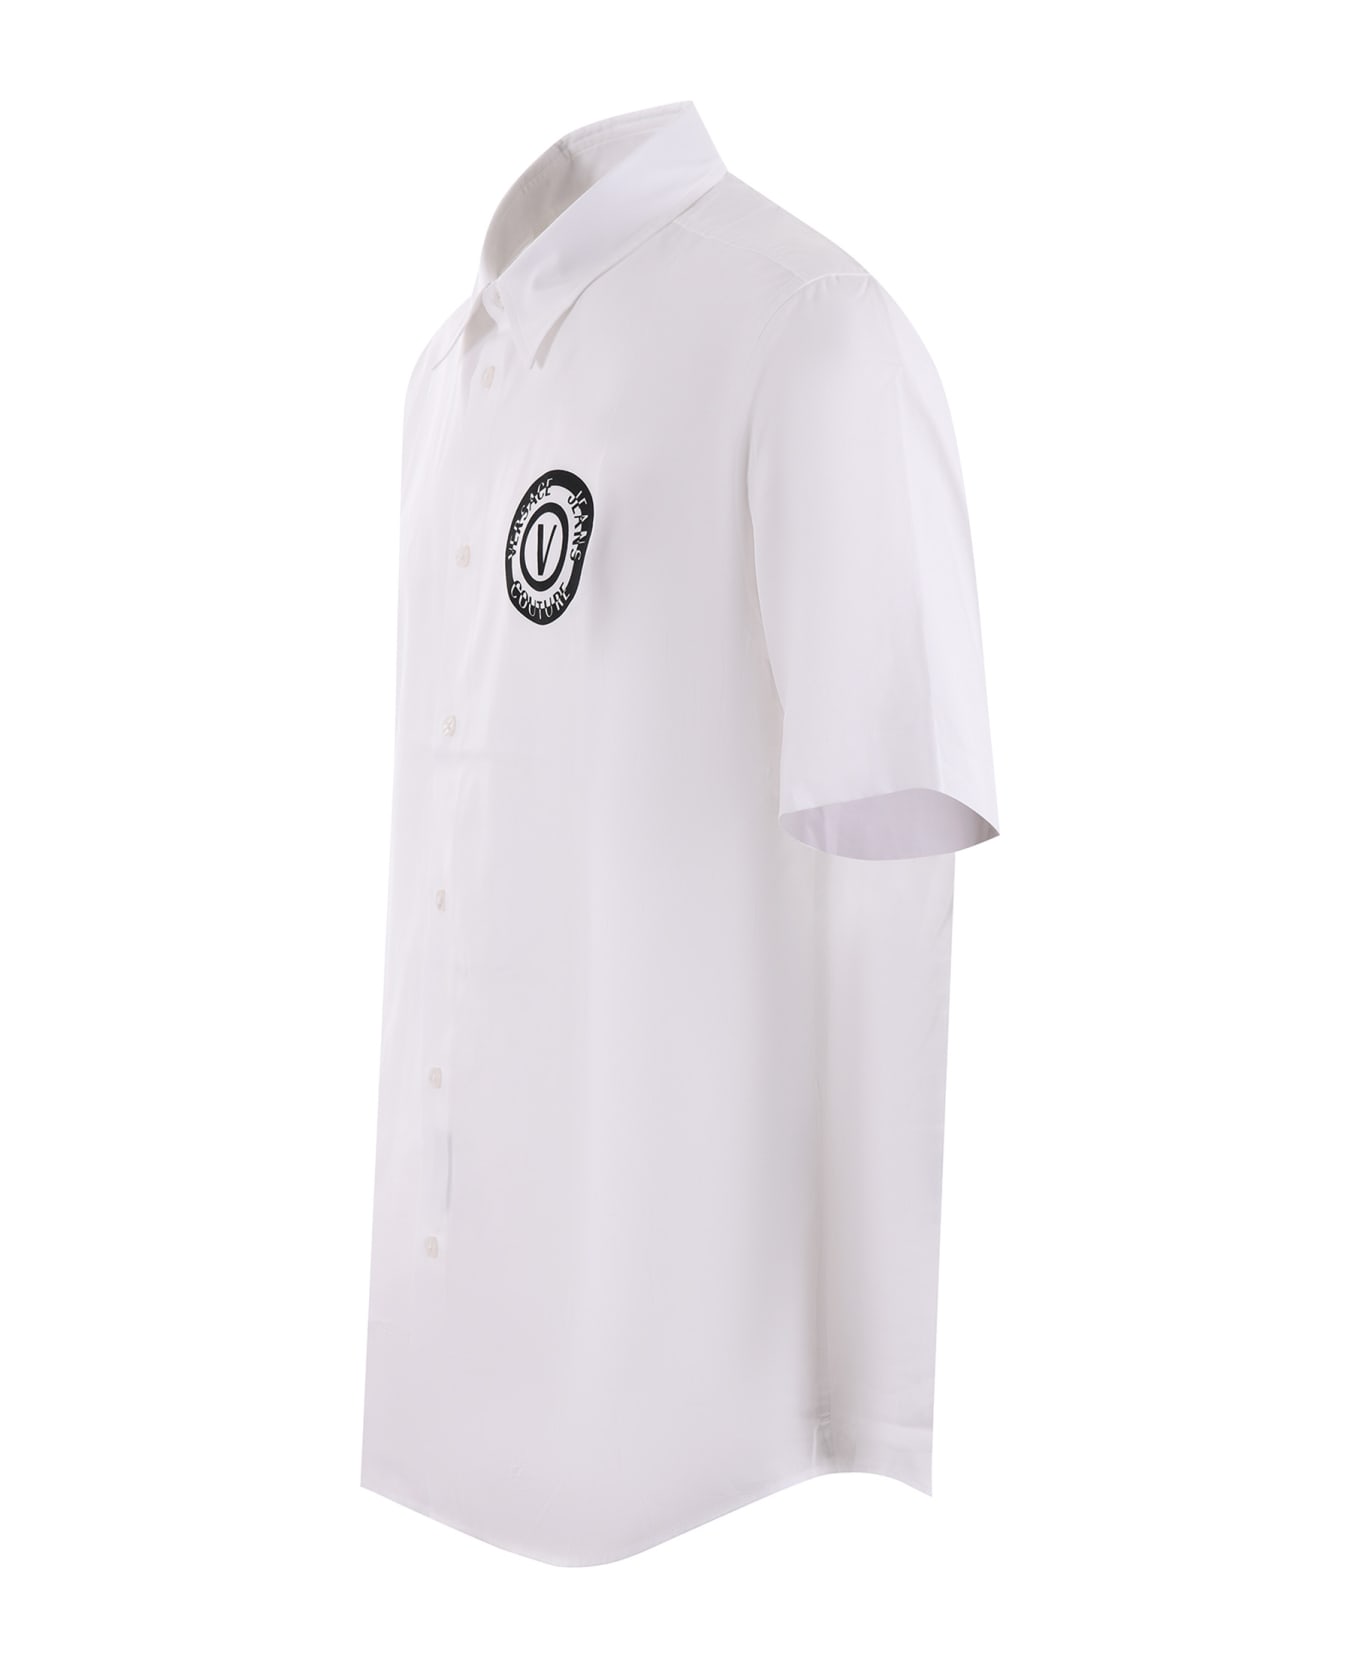 Versace Jeans Couture Shirt - Bianco シャツ